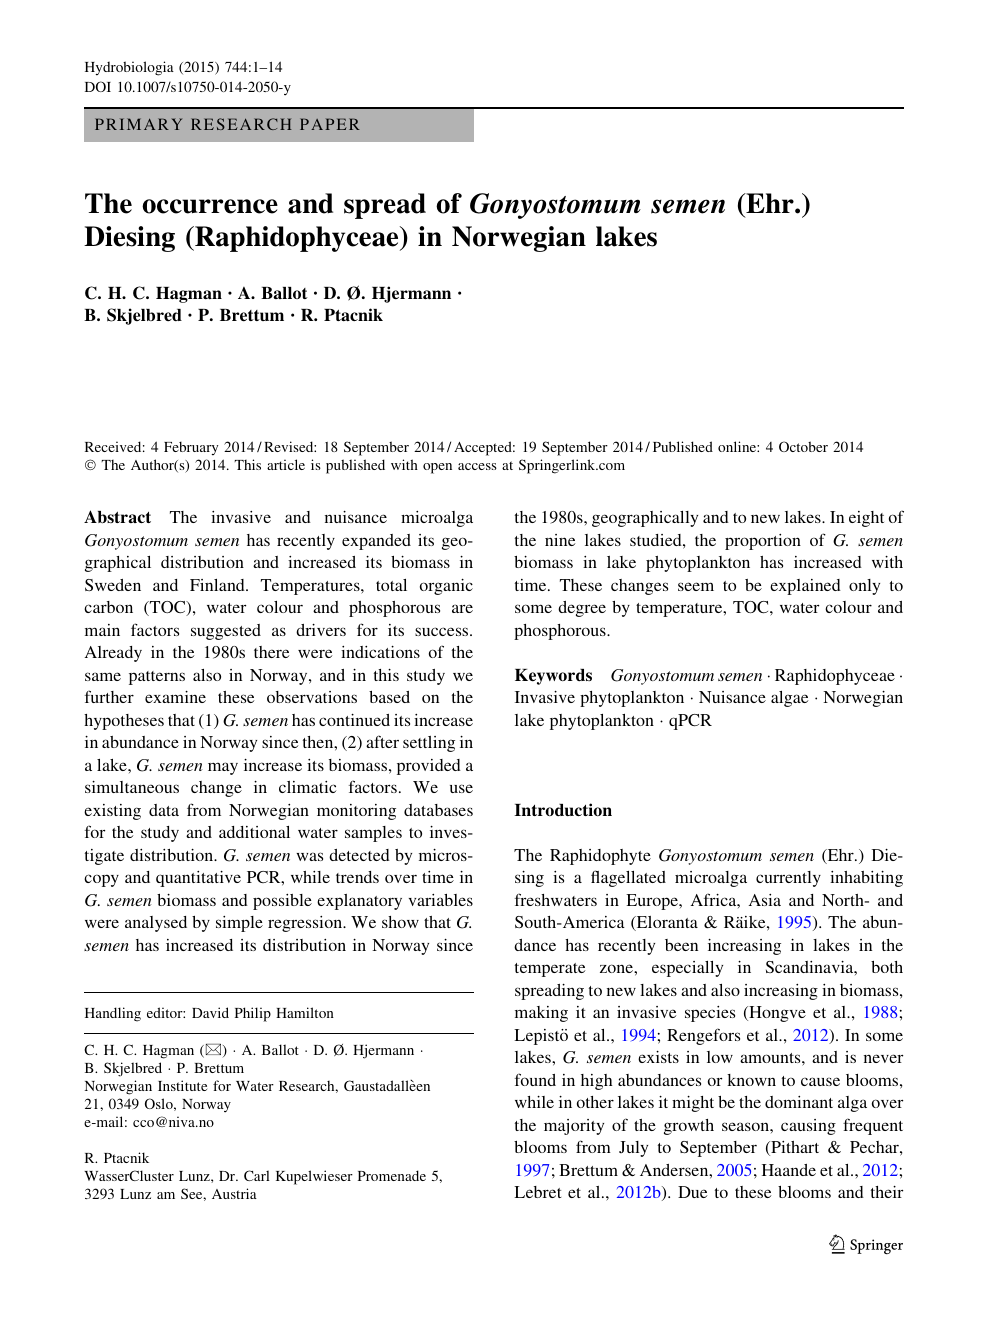 The Occurrence And Spread Of Gonyostomum Semen Ehr Diesing Raphidophyceae In Norwegian Lakes Topic Of Research Paper In Biological Sciences Download Scholarly Article Pdf And Read For Free On Cyberleninka Open